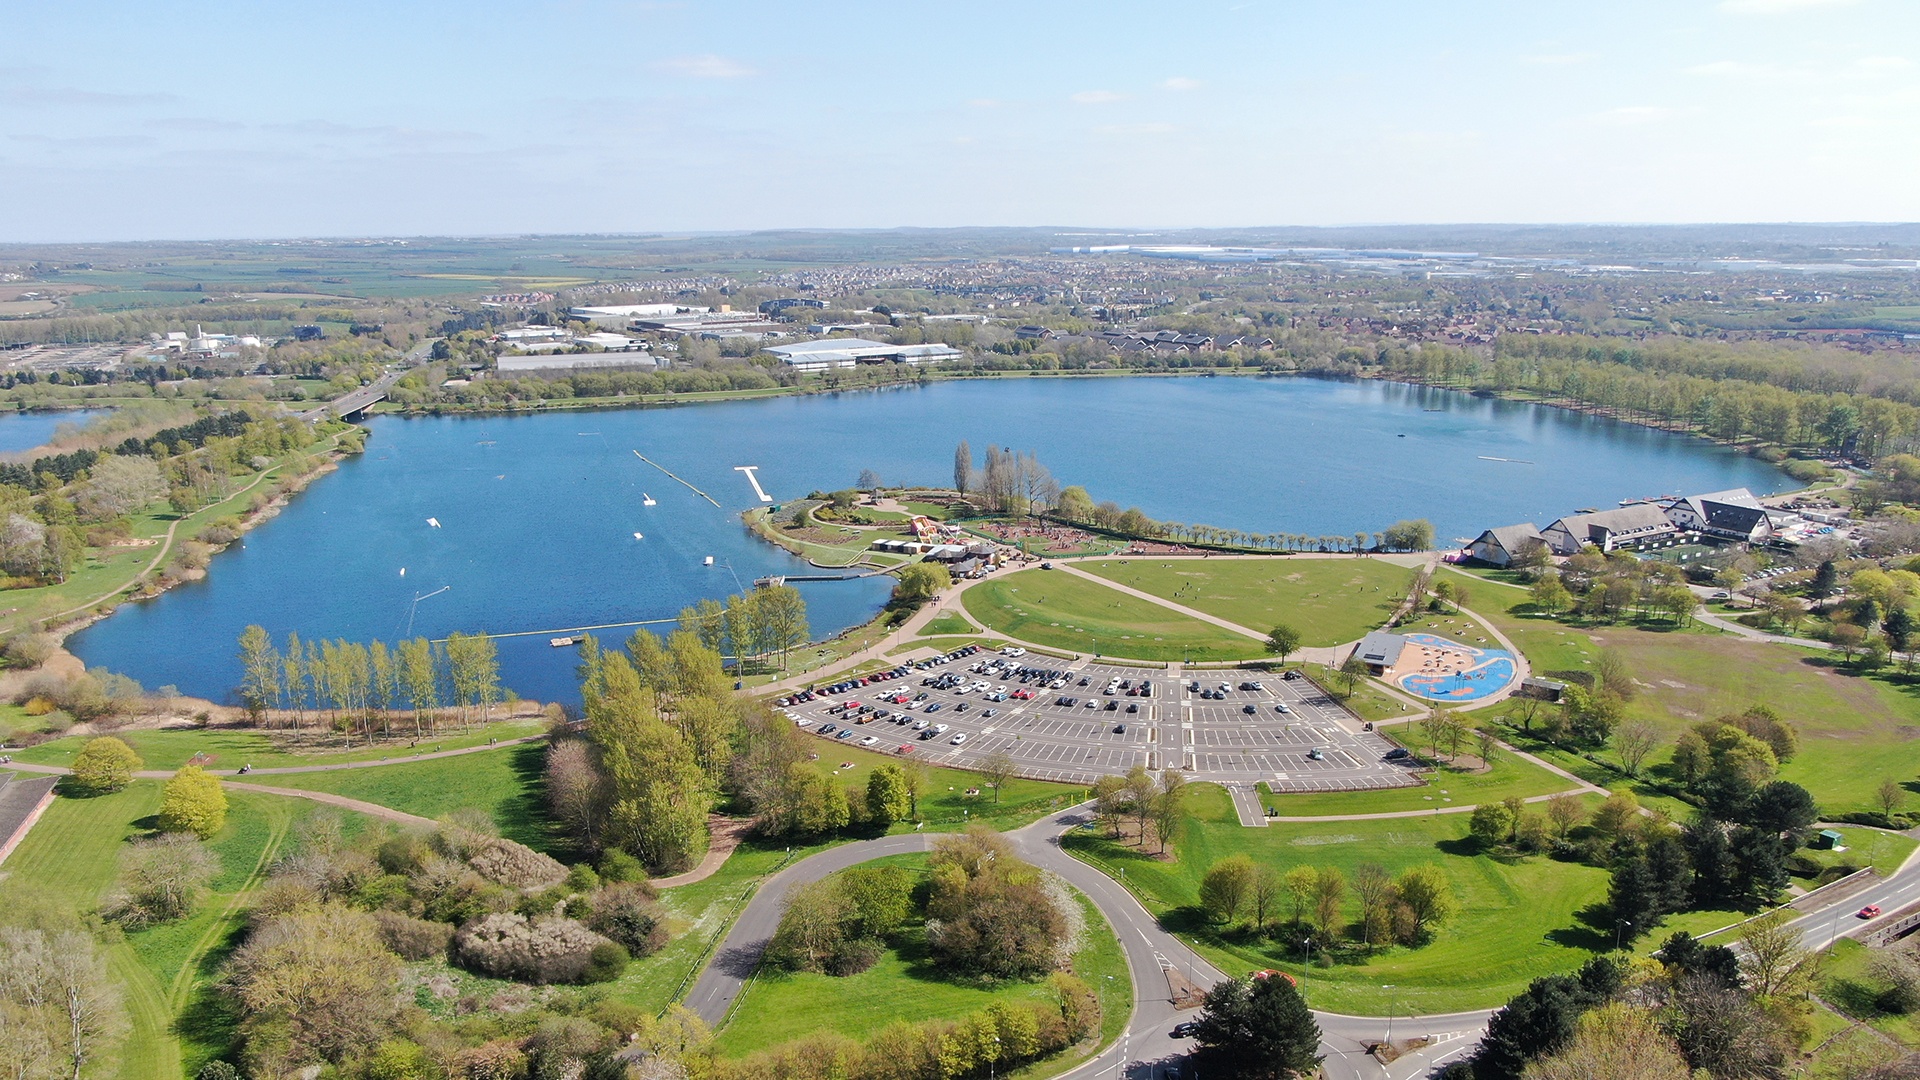 Willen Lake and Howe Park Wood up for national awards